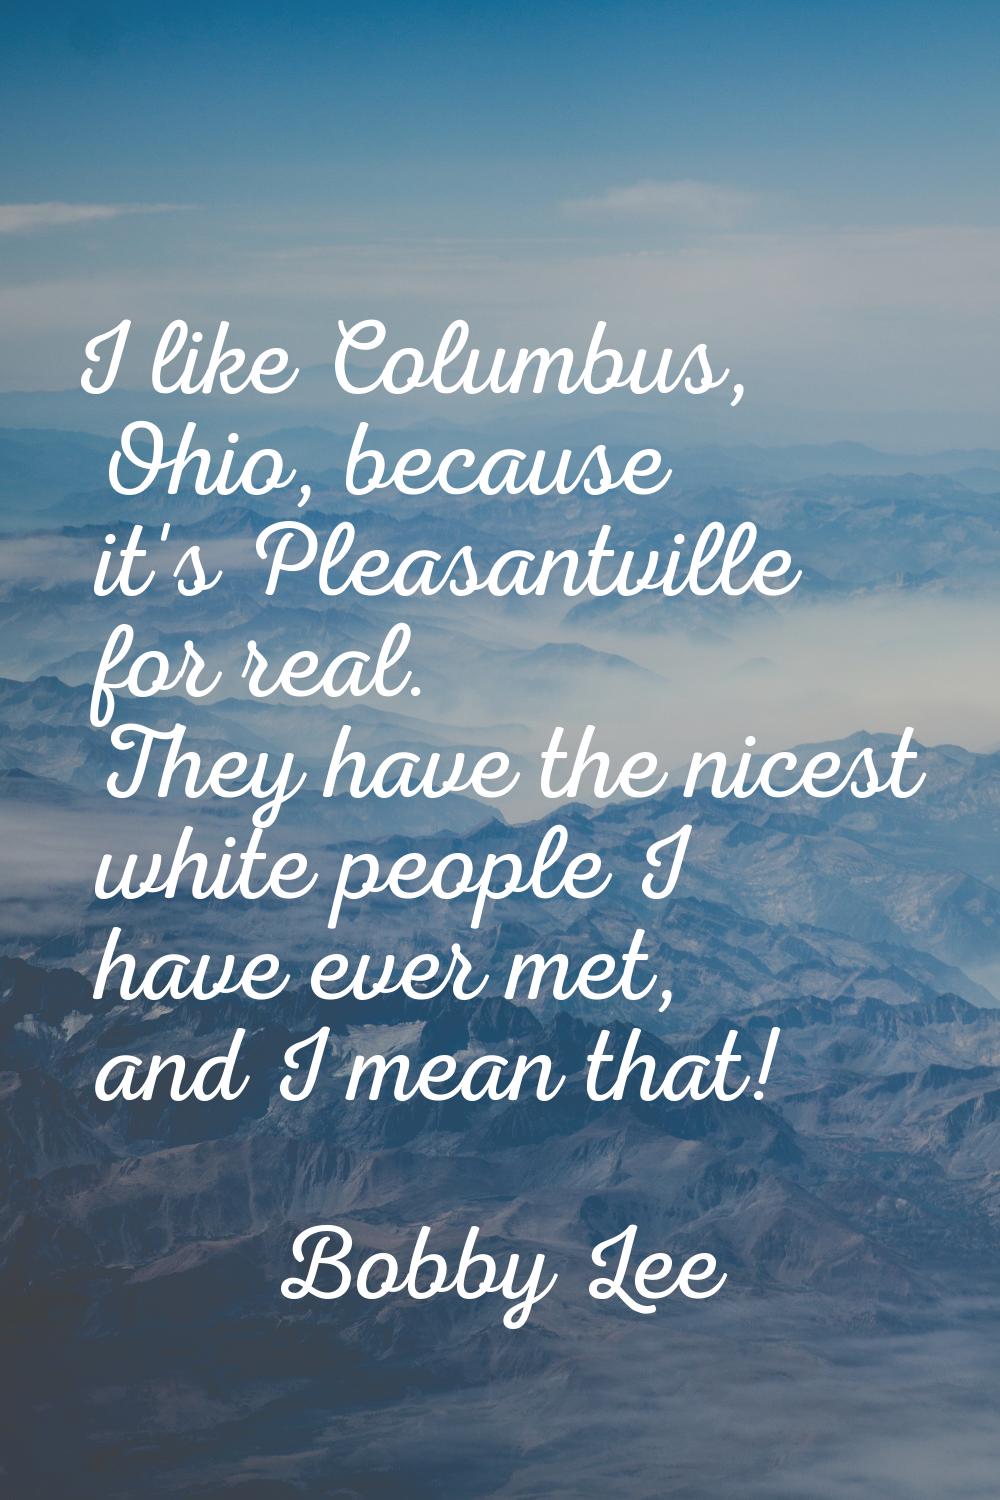 I like Columbus, Ohio, because it's Pleasantville for real. They have the nicest white people I hav